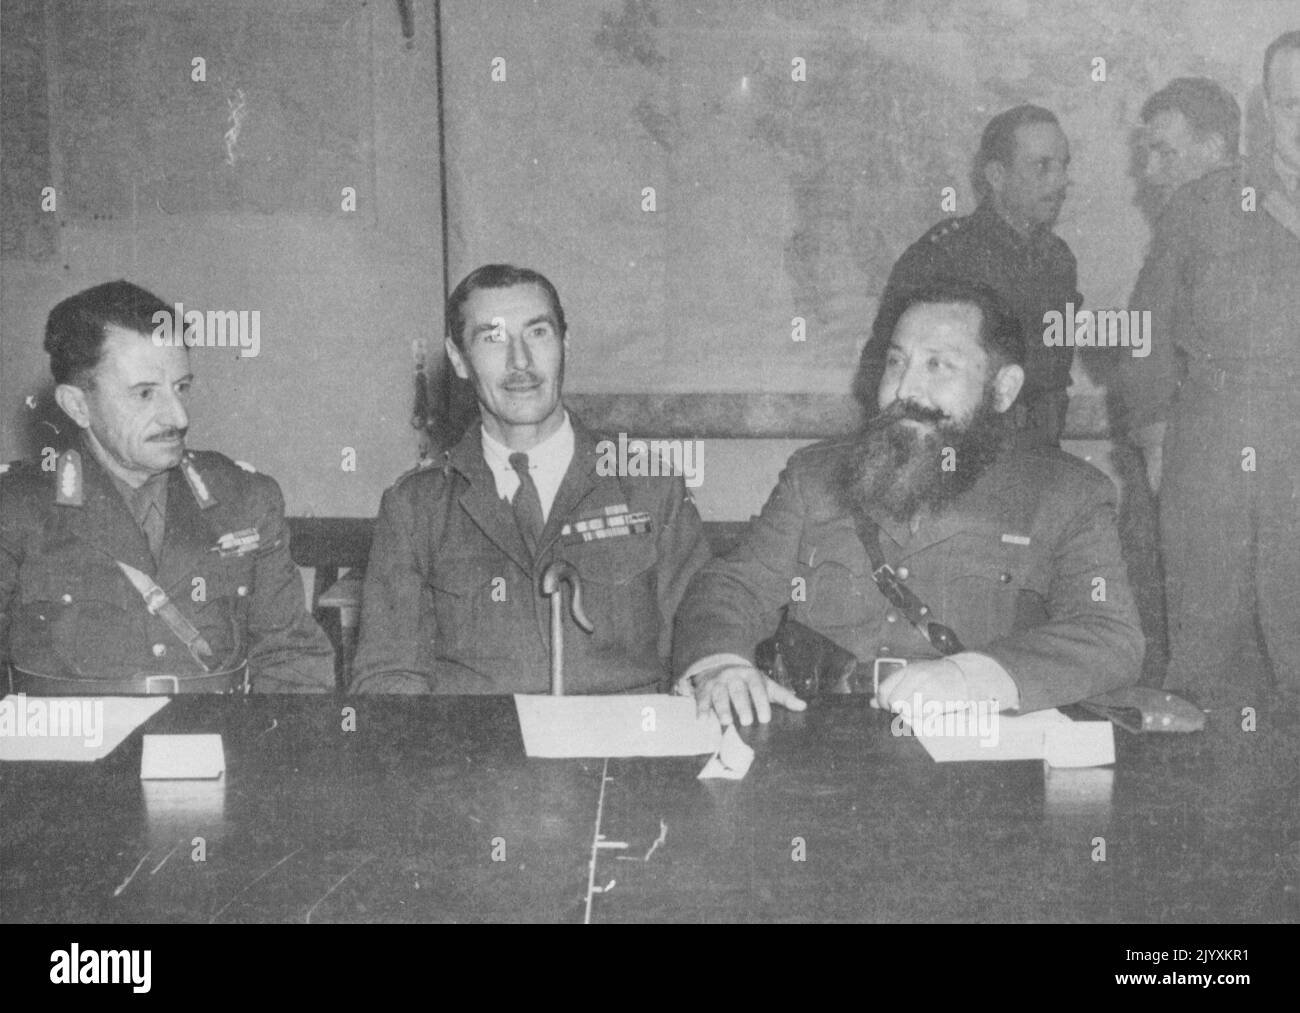 Gen. Scobie confers with rival Greek leaders Major Gen. R.M. Scobie (center), British officer commanding all Allied land forces in Greece, confers with Col. Stephanos Seraphis (left), Elas commander, and Col. Napoleon Zervas, Edes commander, during a November 23 meeting. January 22, 1945. (Photo by Associated Press Photo). Stock Photo